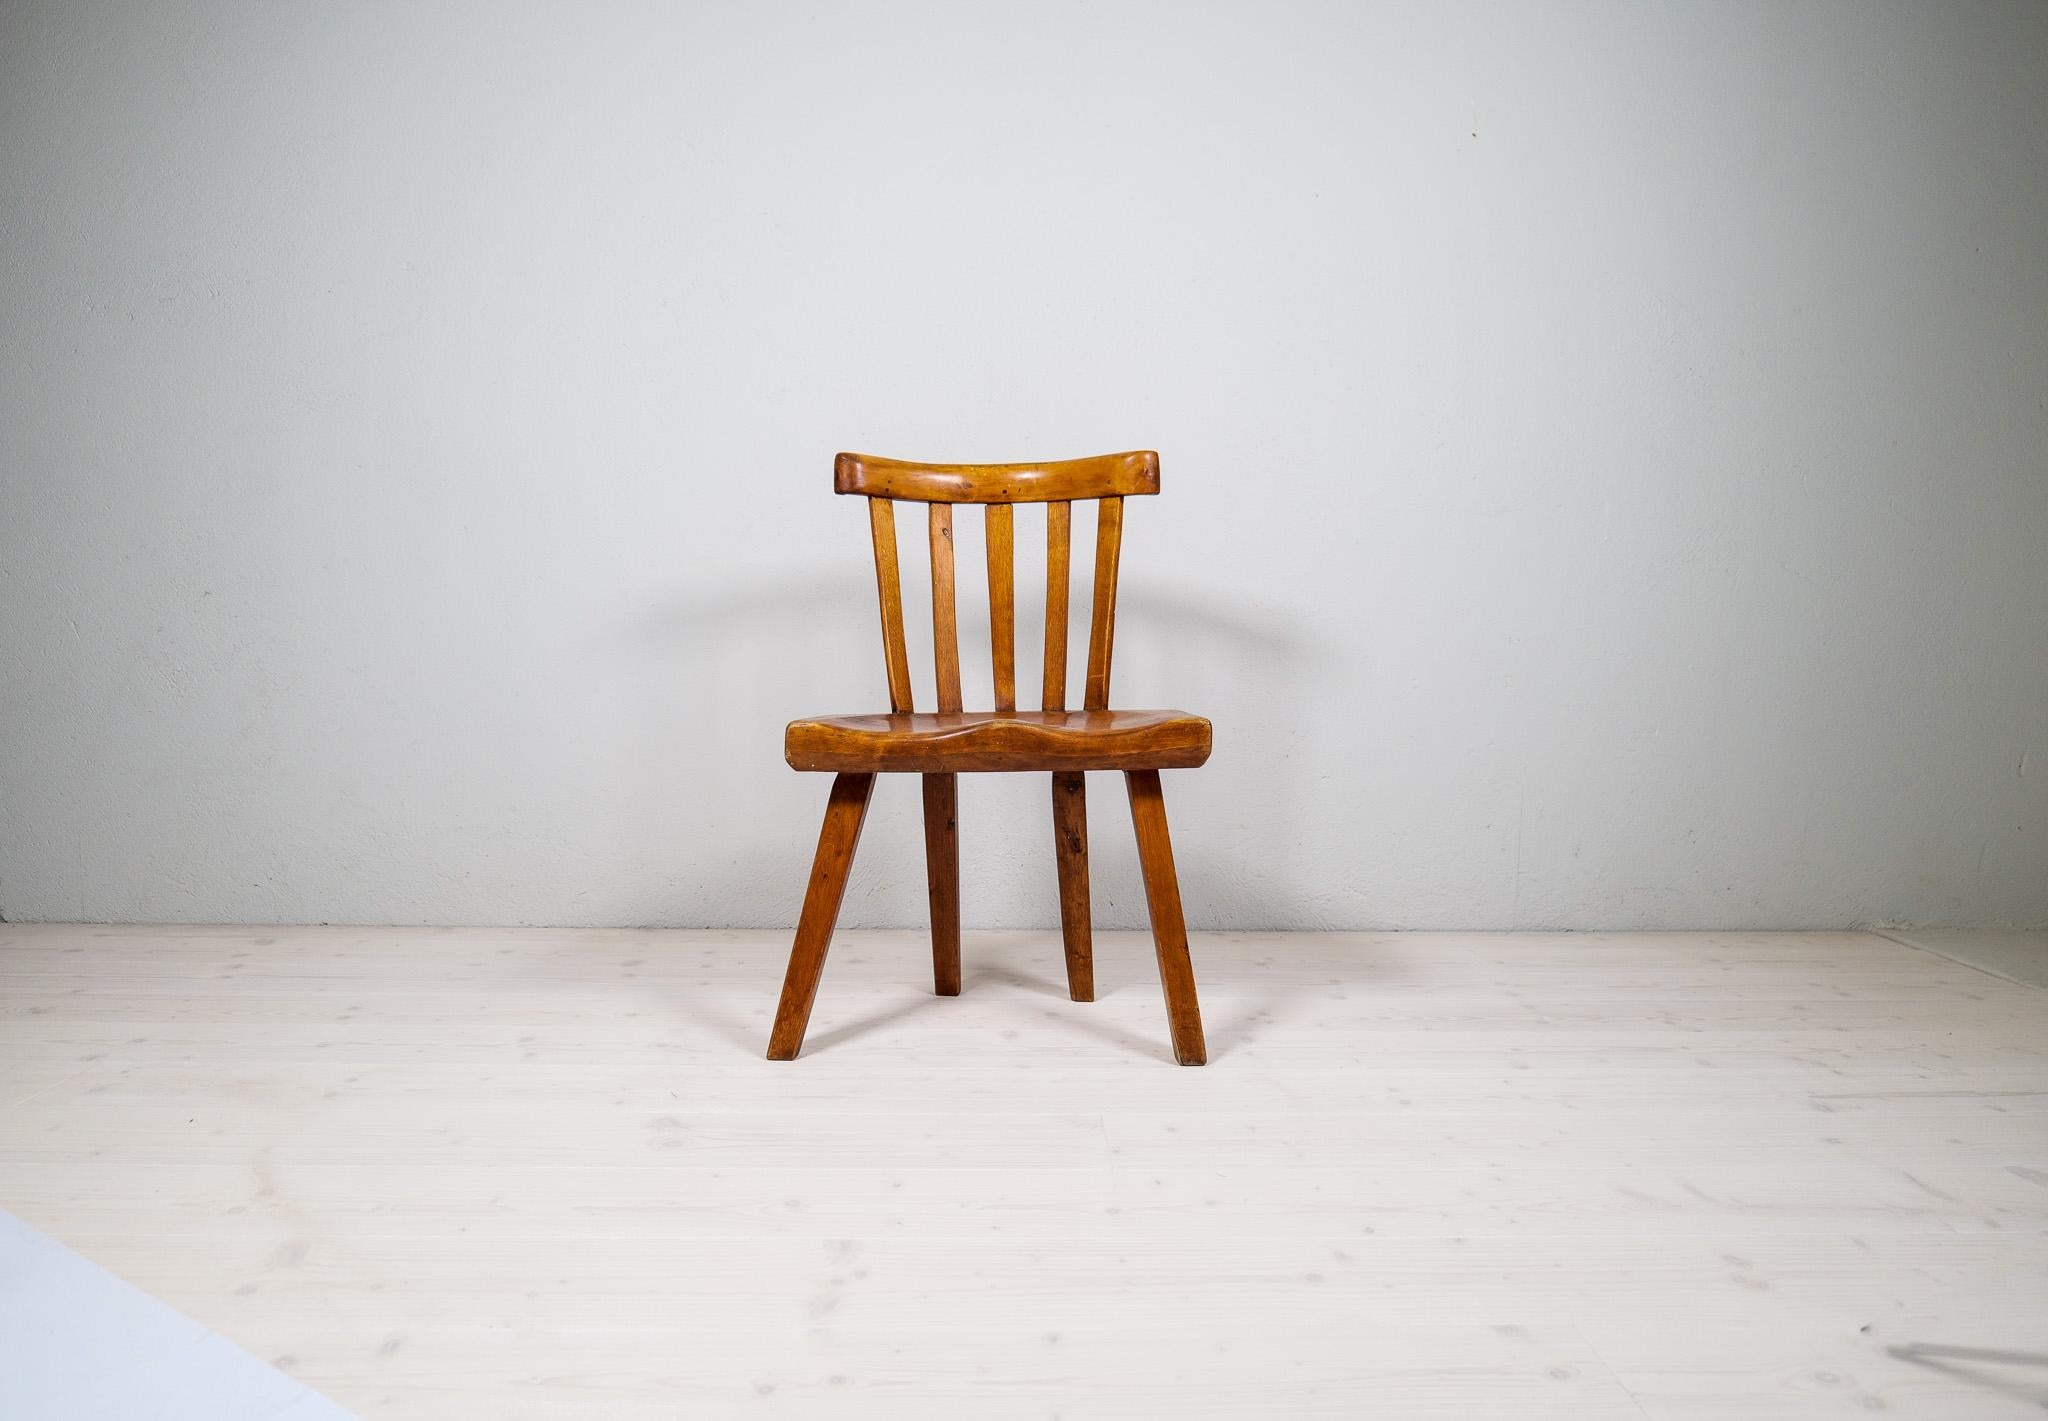 Folk art made in Sweden at its best. This chair with highly appealing shapes and patina. Made in the late 19th century this chair is a given piece to any modern home that wants to have something out of the ordinary. Caved seat and the top of the